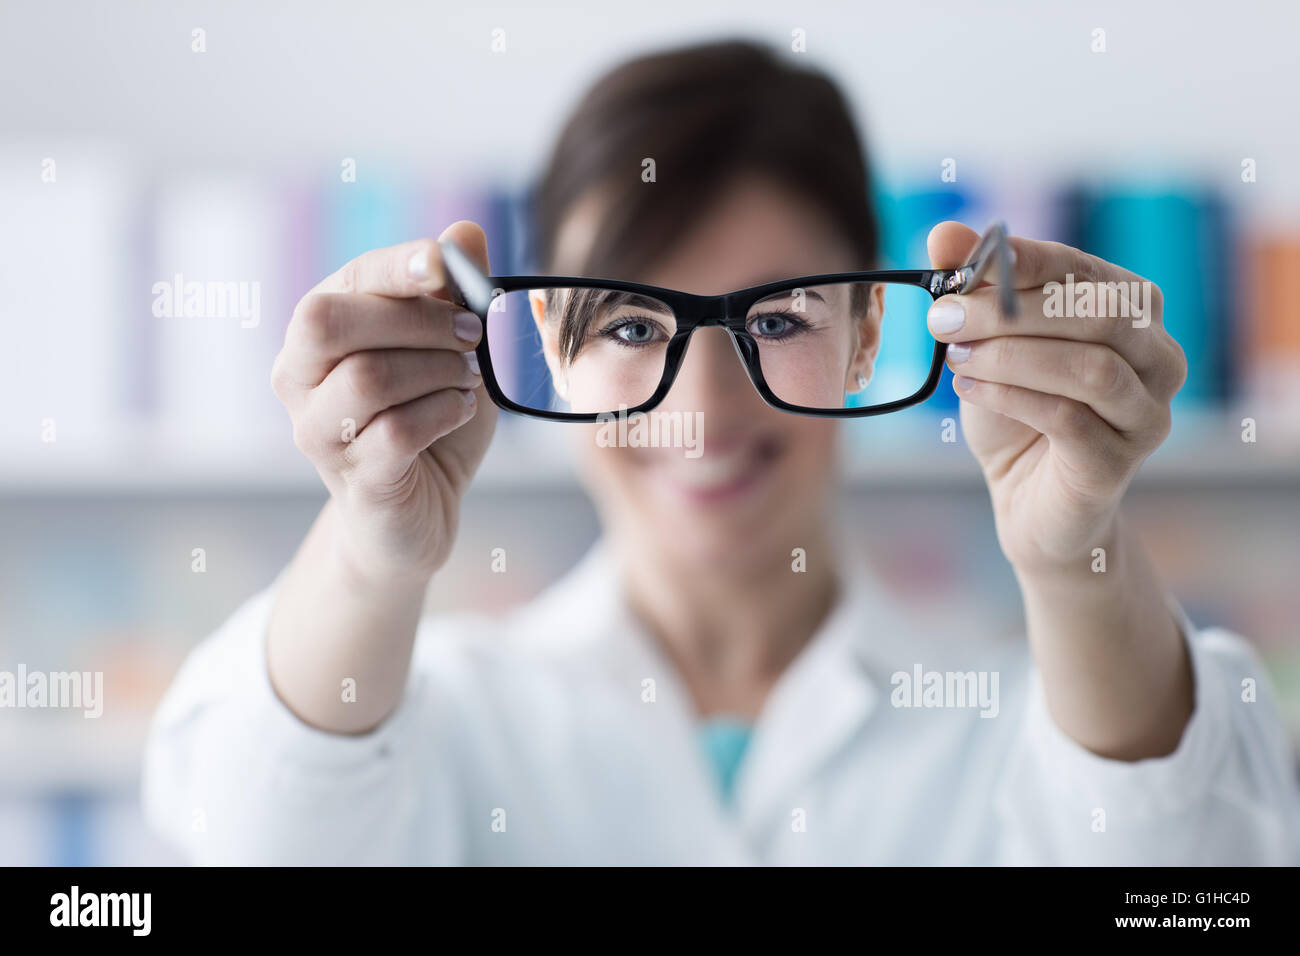 Optometrist giving eyewear to the patient, glasses on foreground, eye care concept, selective focus Stock Photo